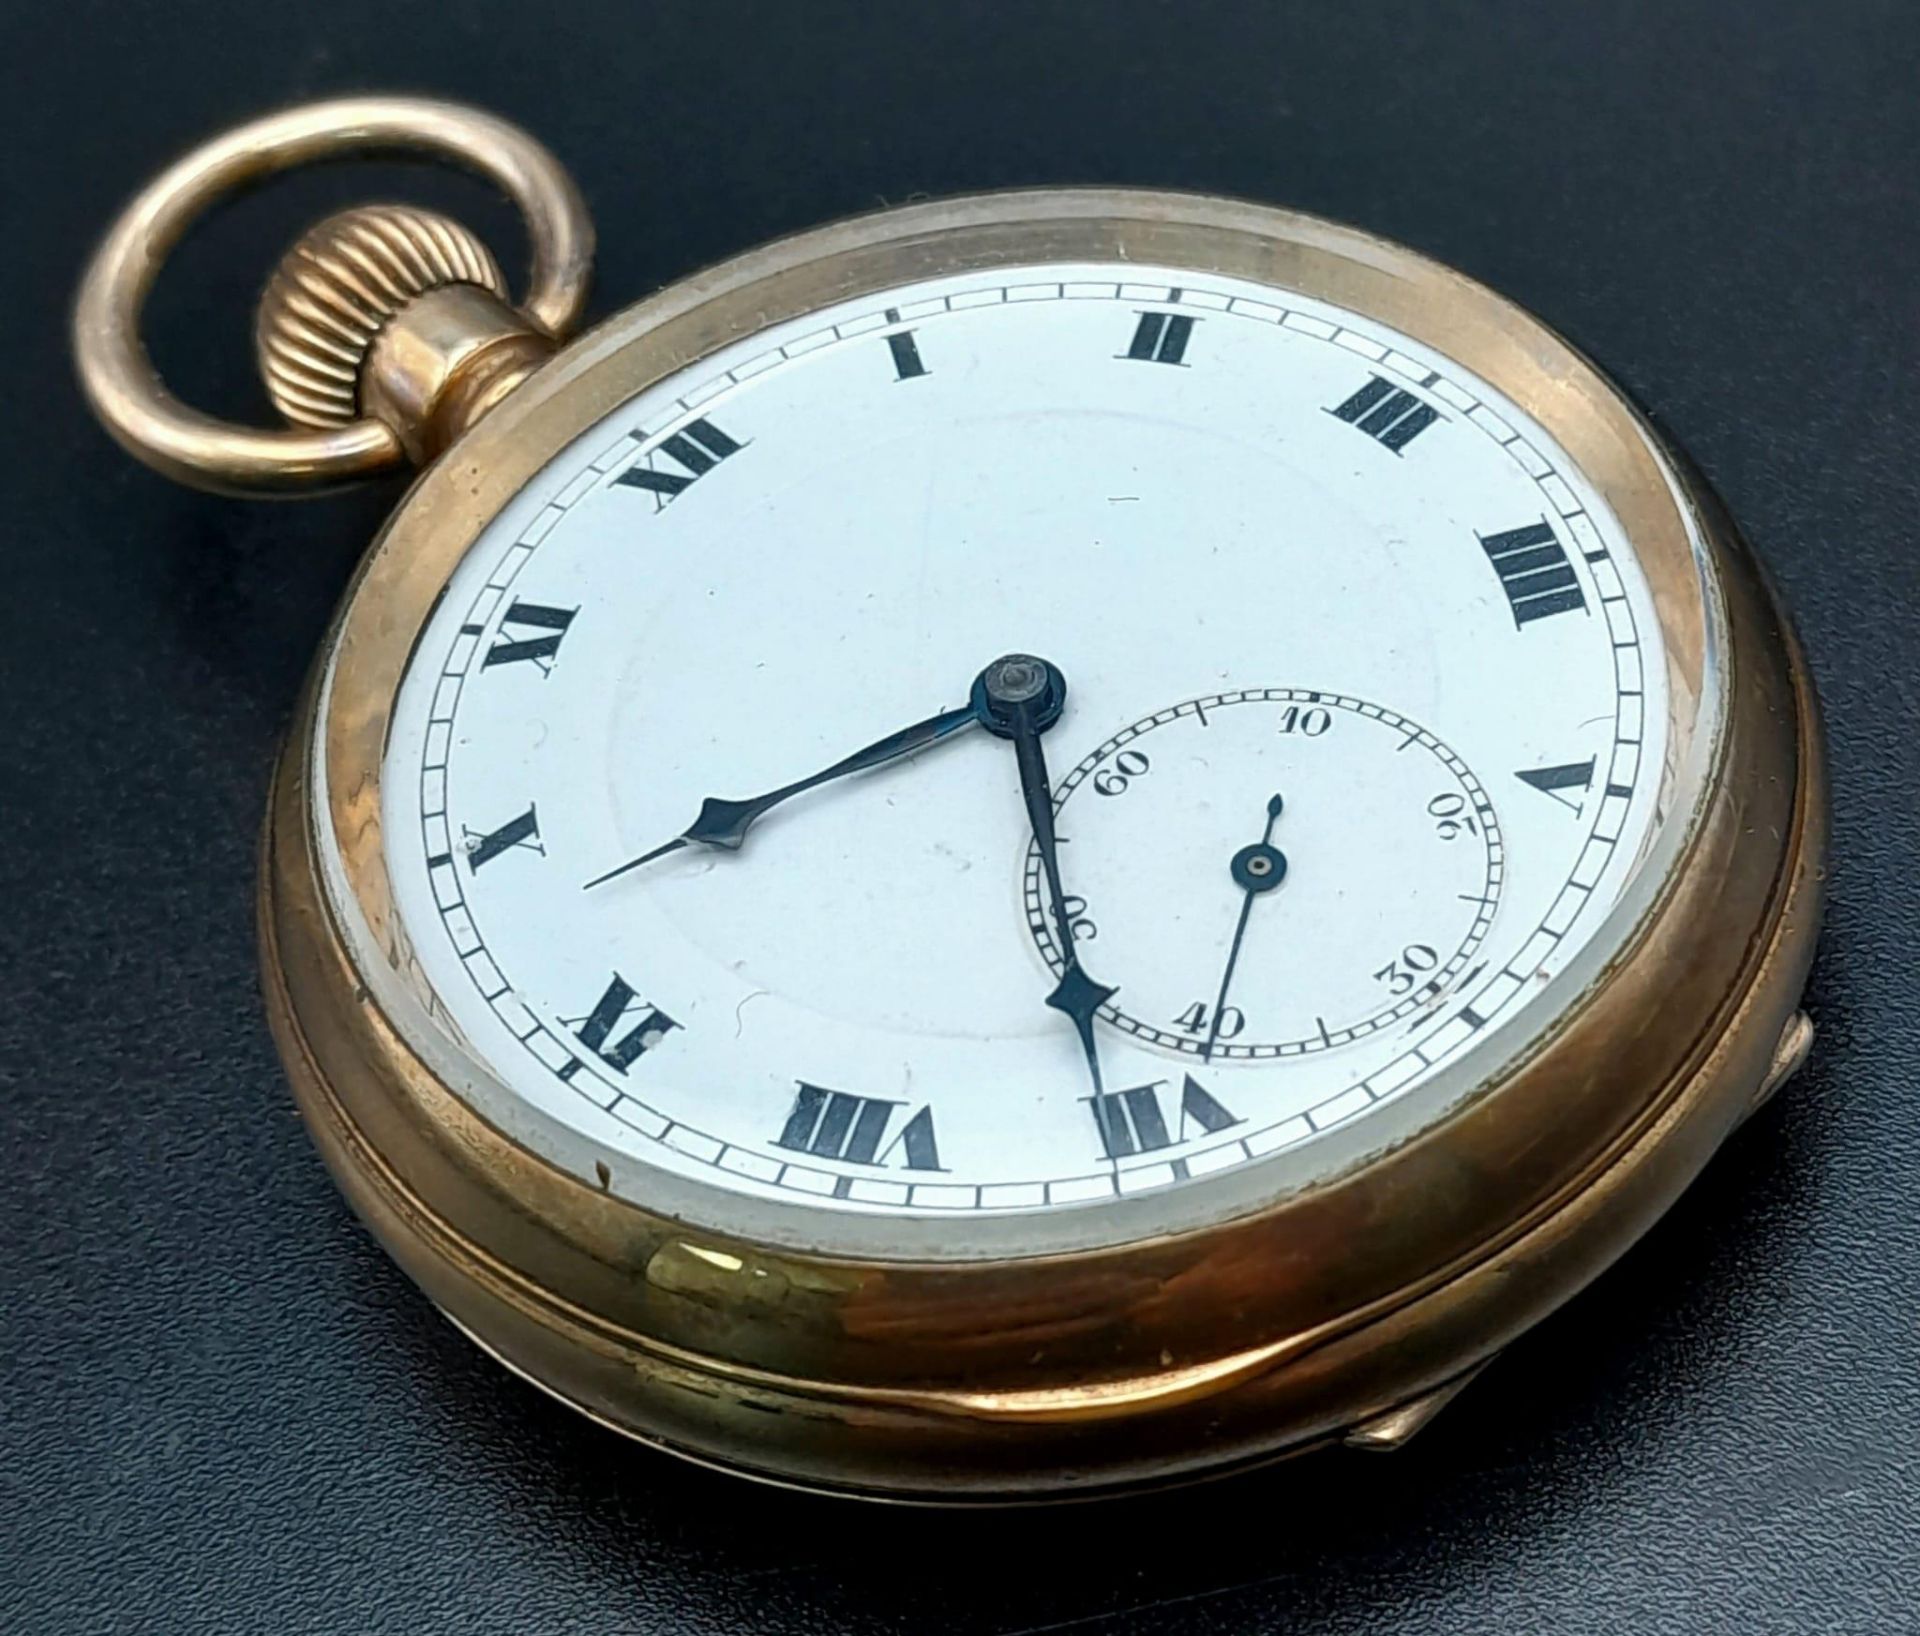 An Antique Illinois Gold Plated Pocket Watch with a Buren Movement. 5cm diameter. White dial with